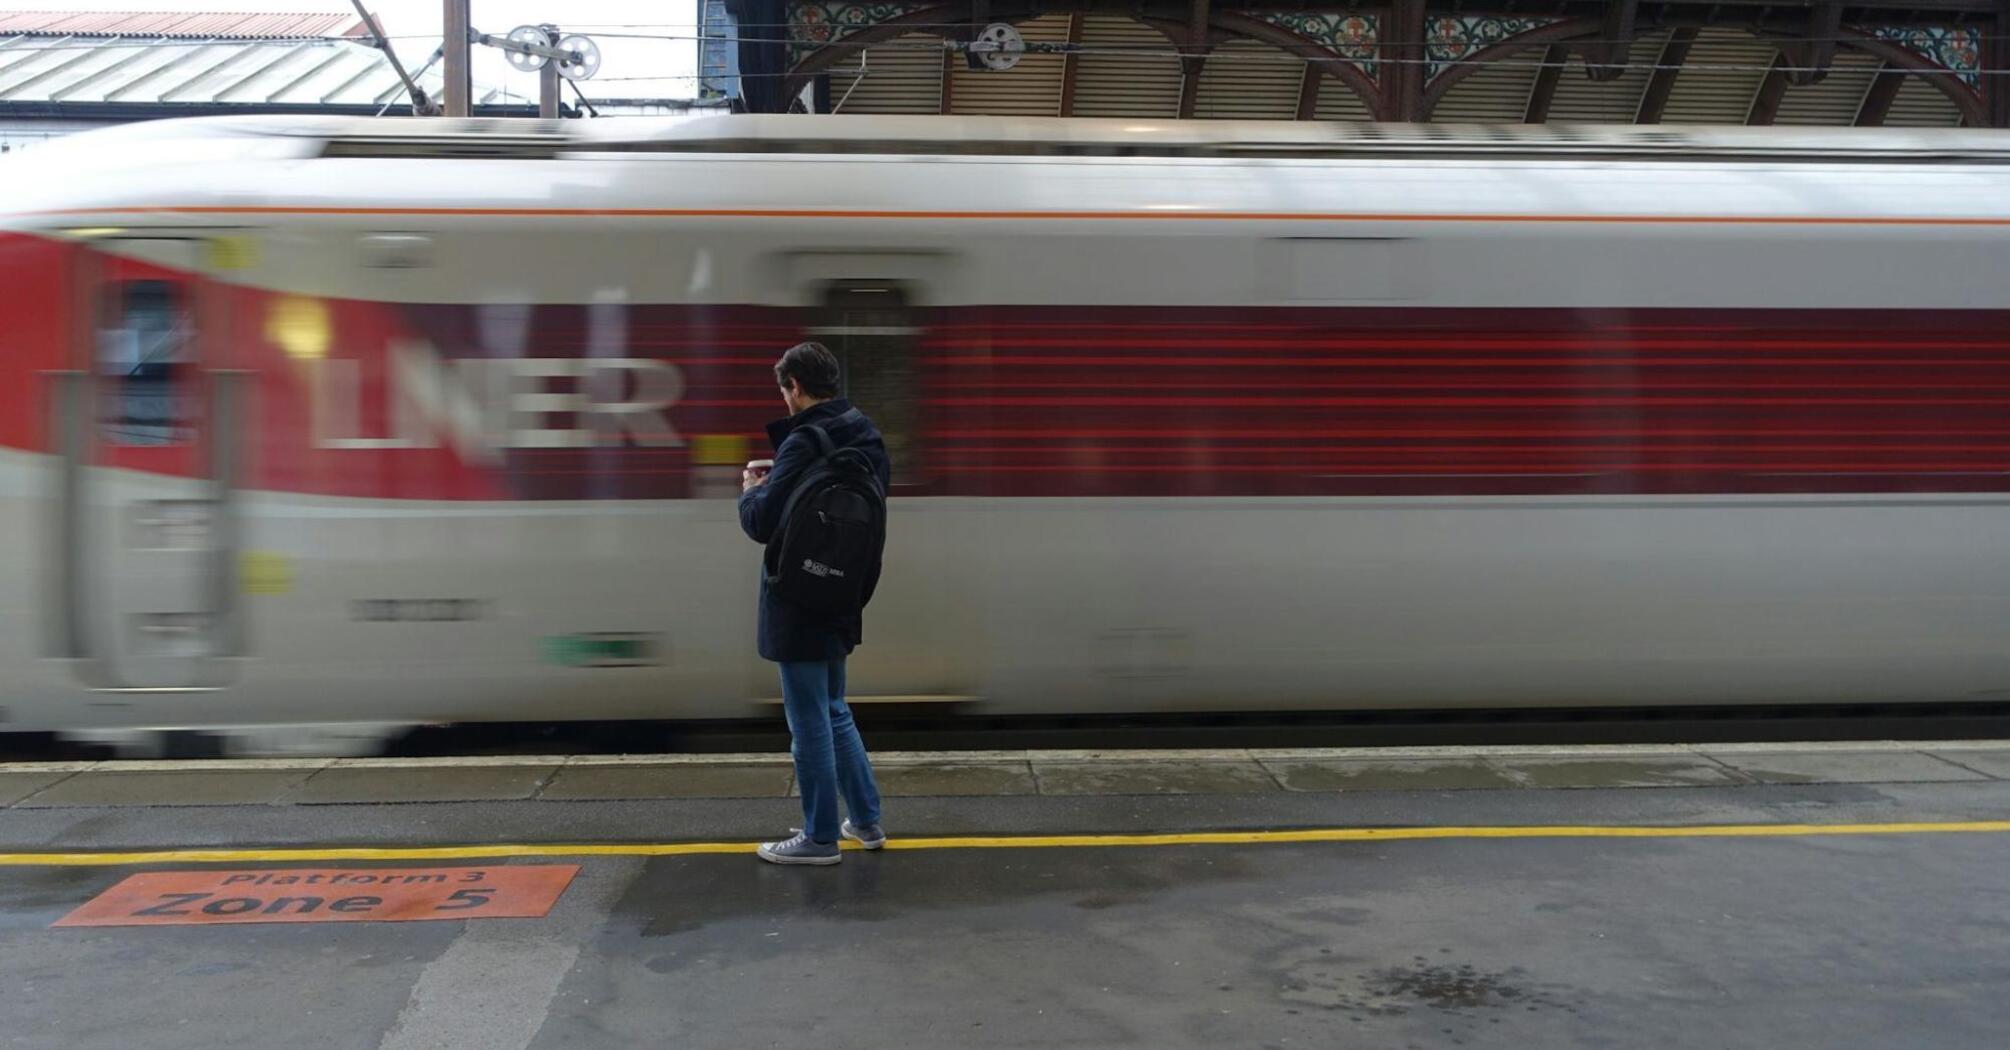 A man standing on a station in front of a LNER train